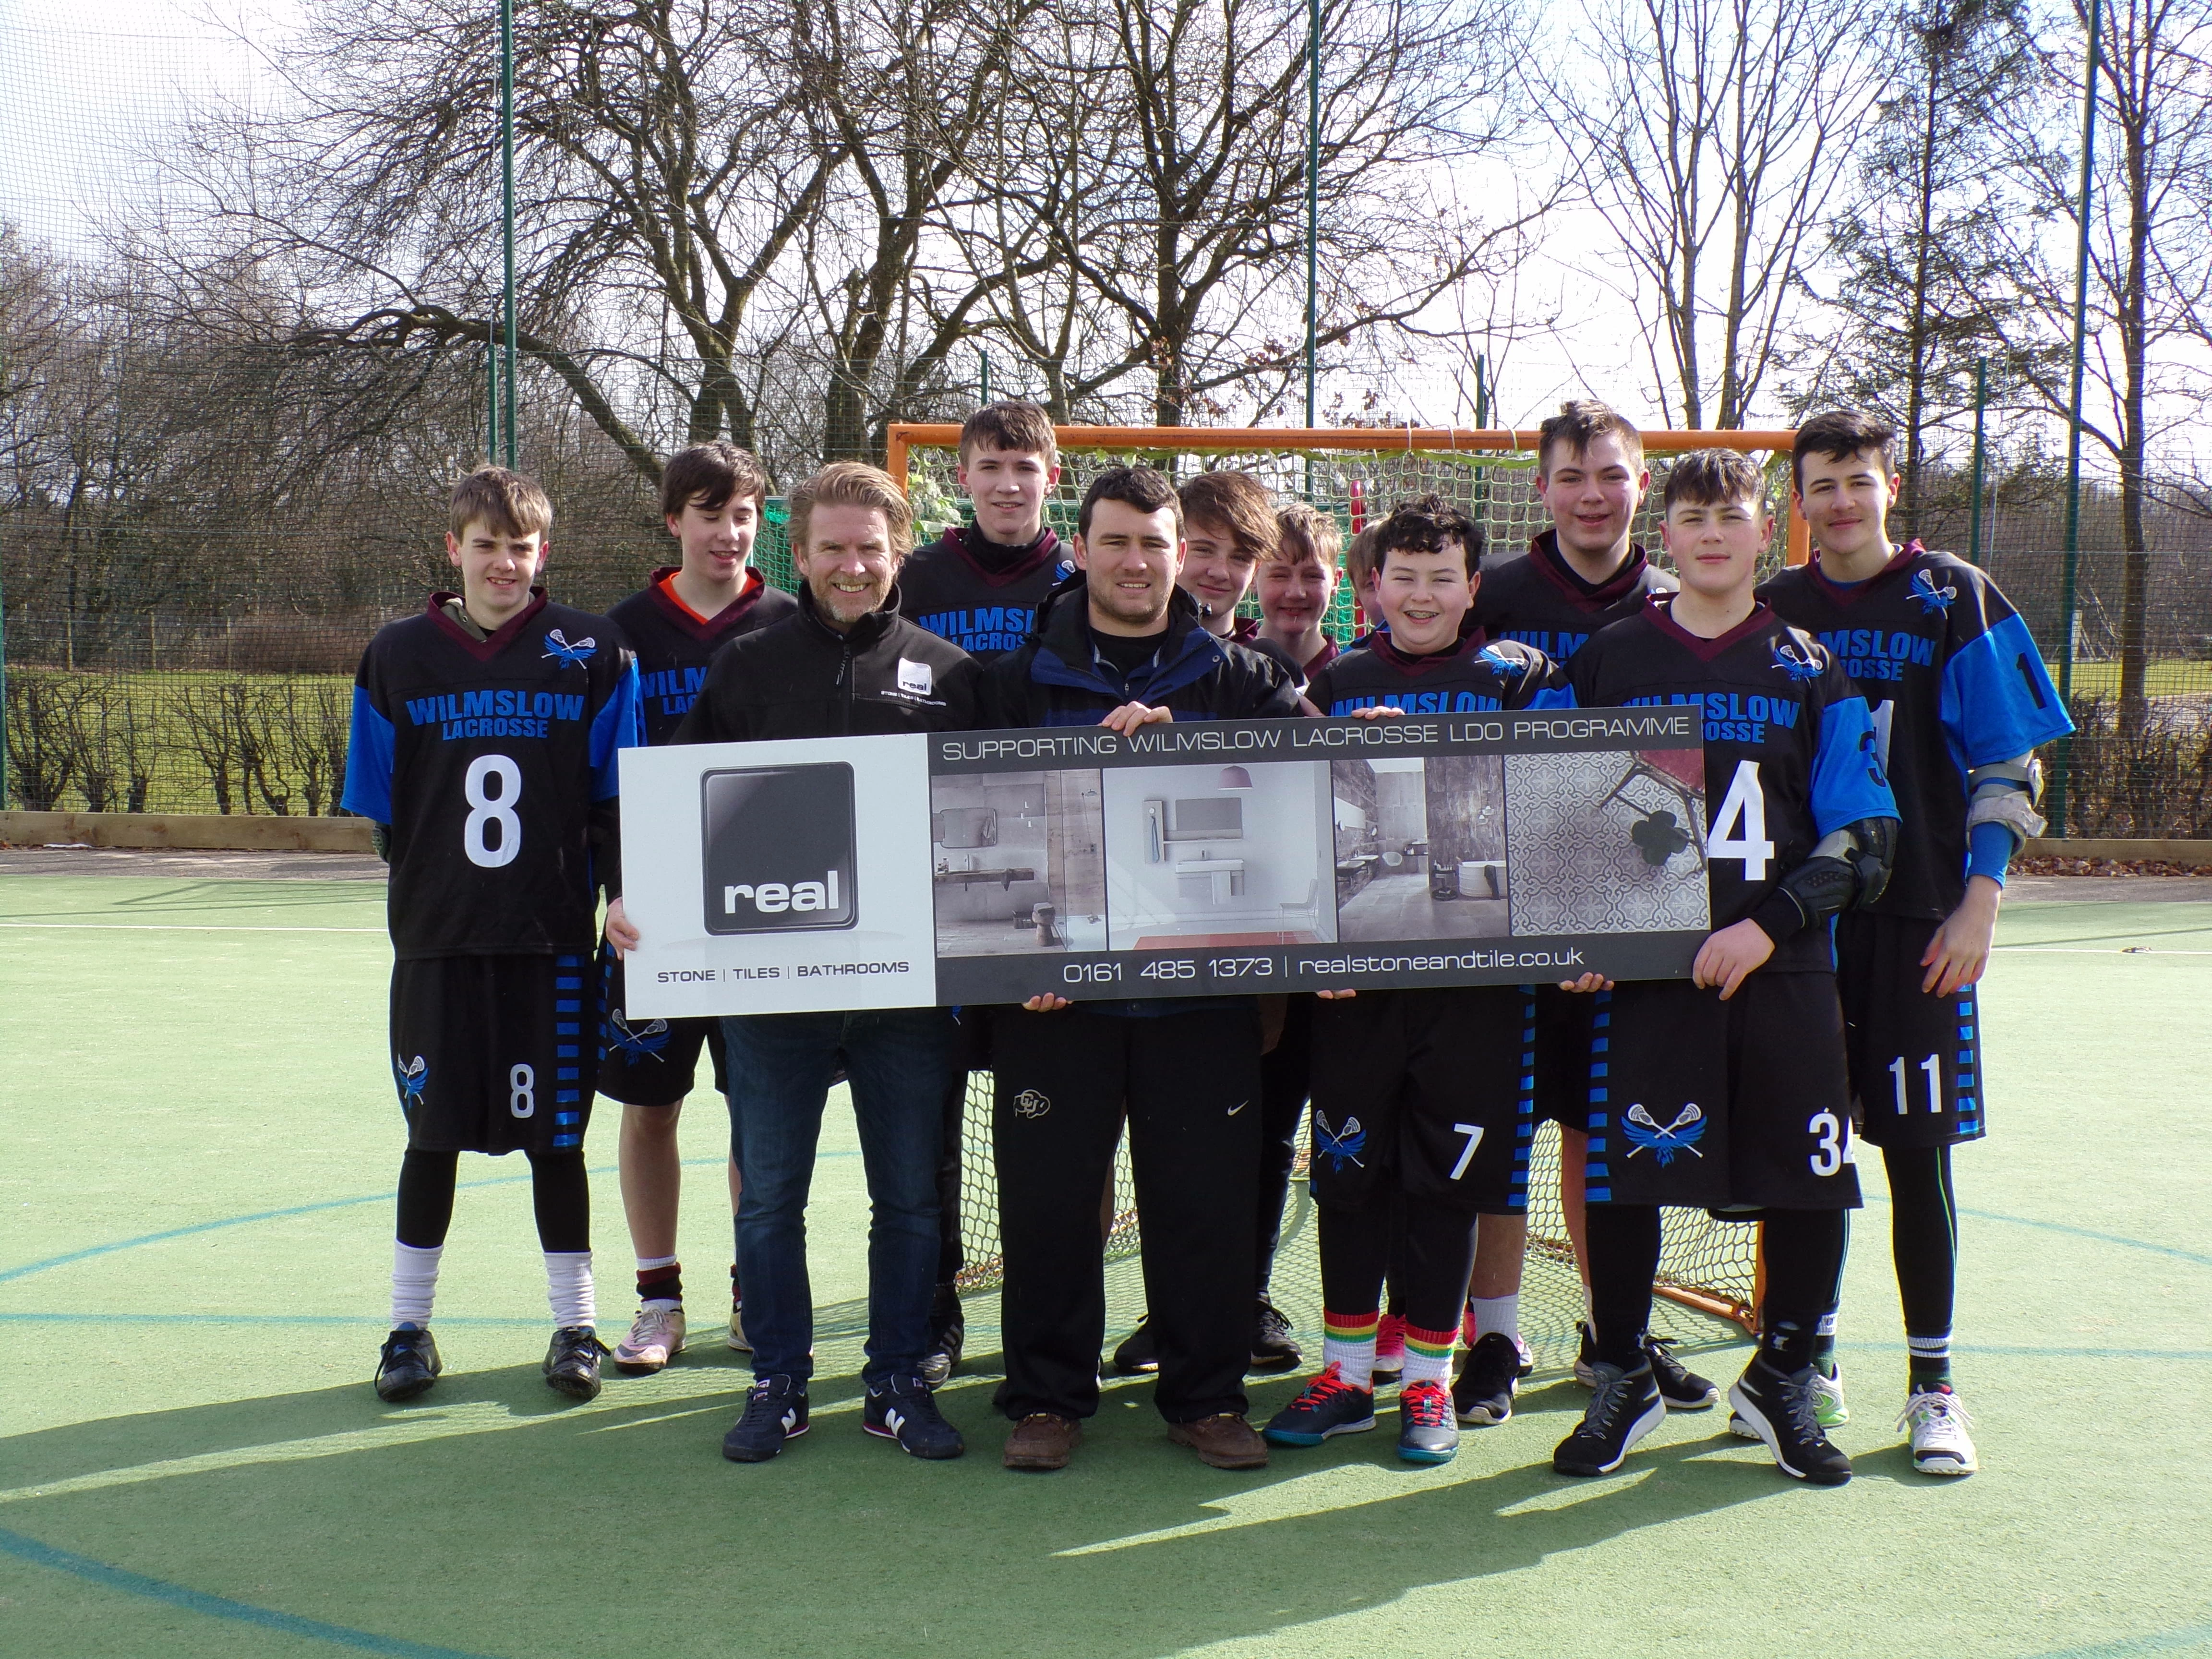 Real Stone & Tile Co-Director, Leigh Price, with the Wilmslow Lacrosse Team